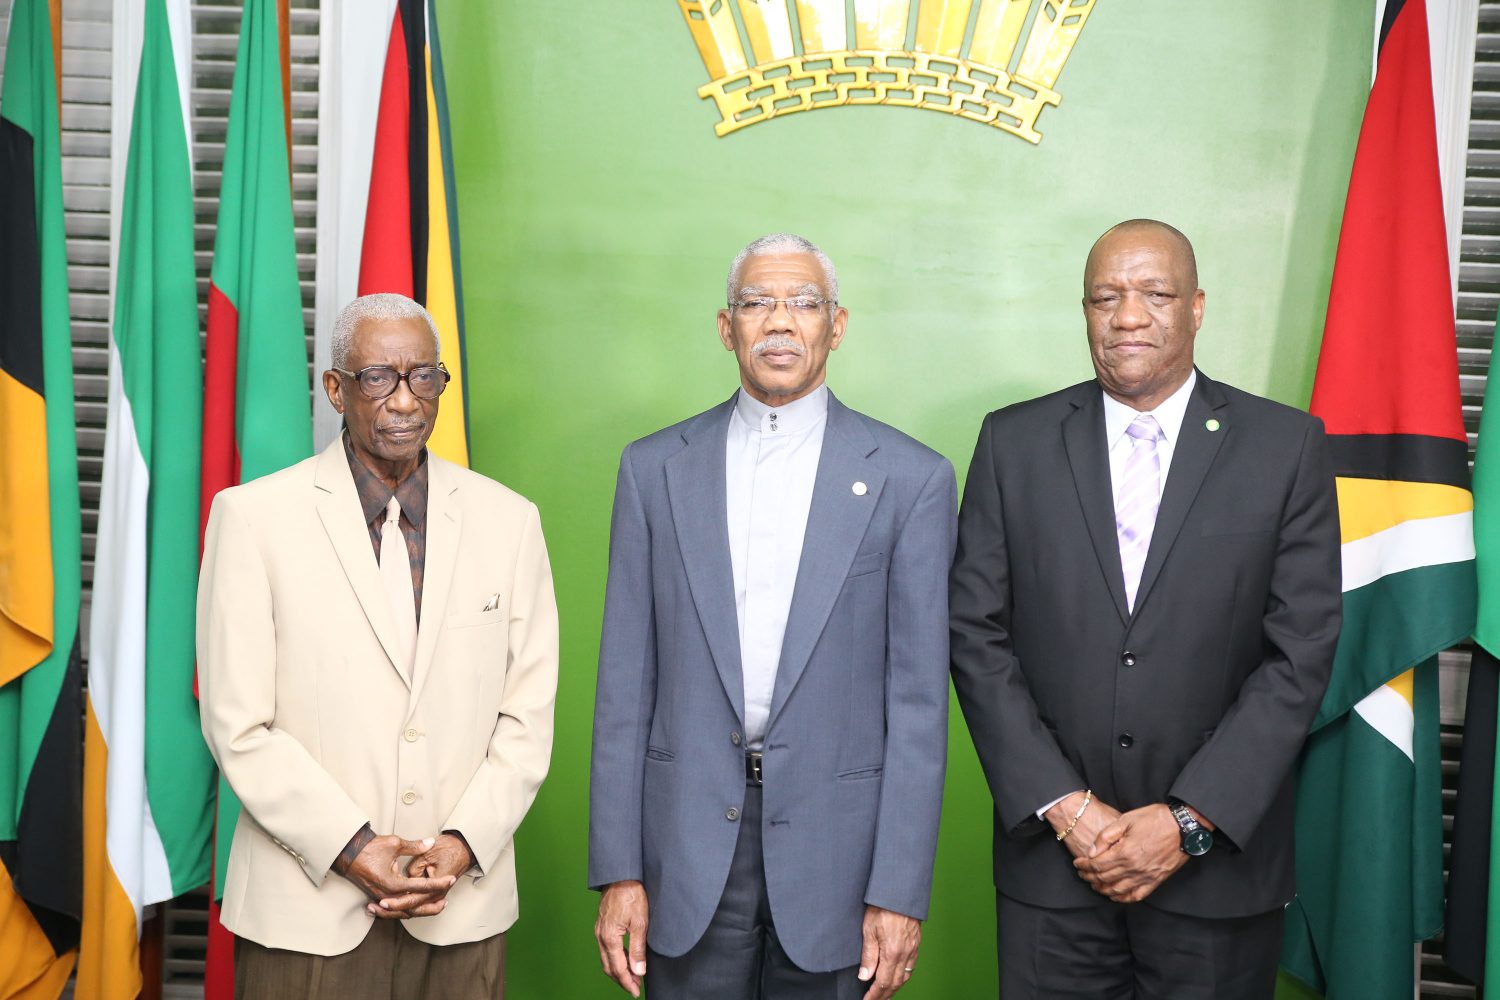 President David Granger (centre) with the new GECOM Chairman, retired Justice James Patterson (left) and Minister of State Joseph Harmon at the swearing in.